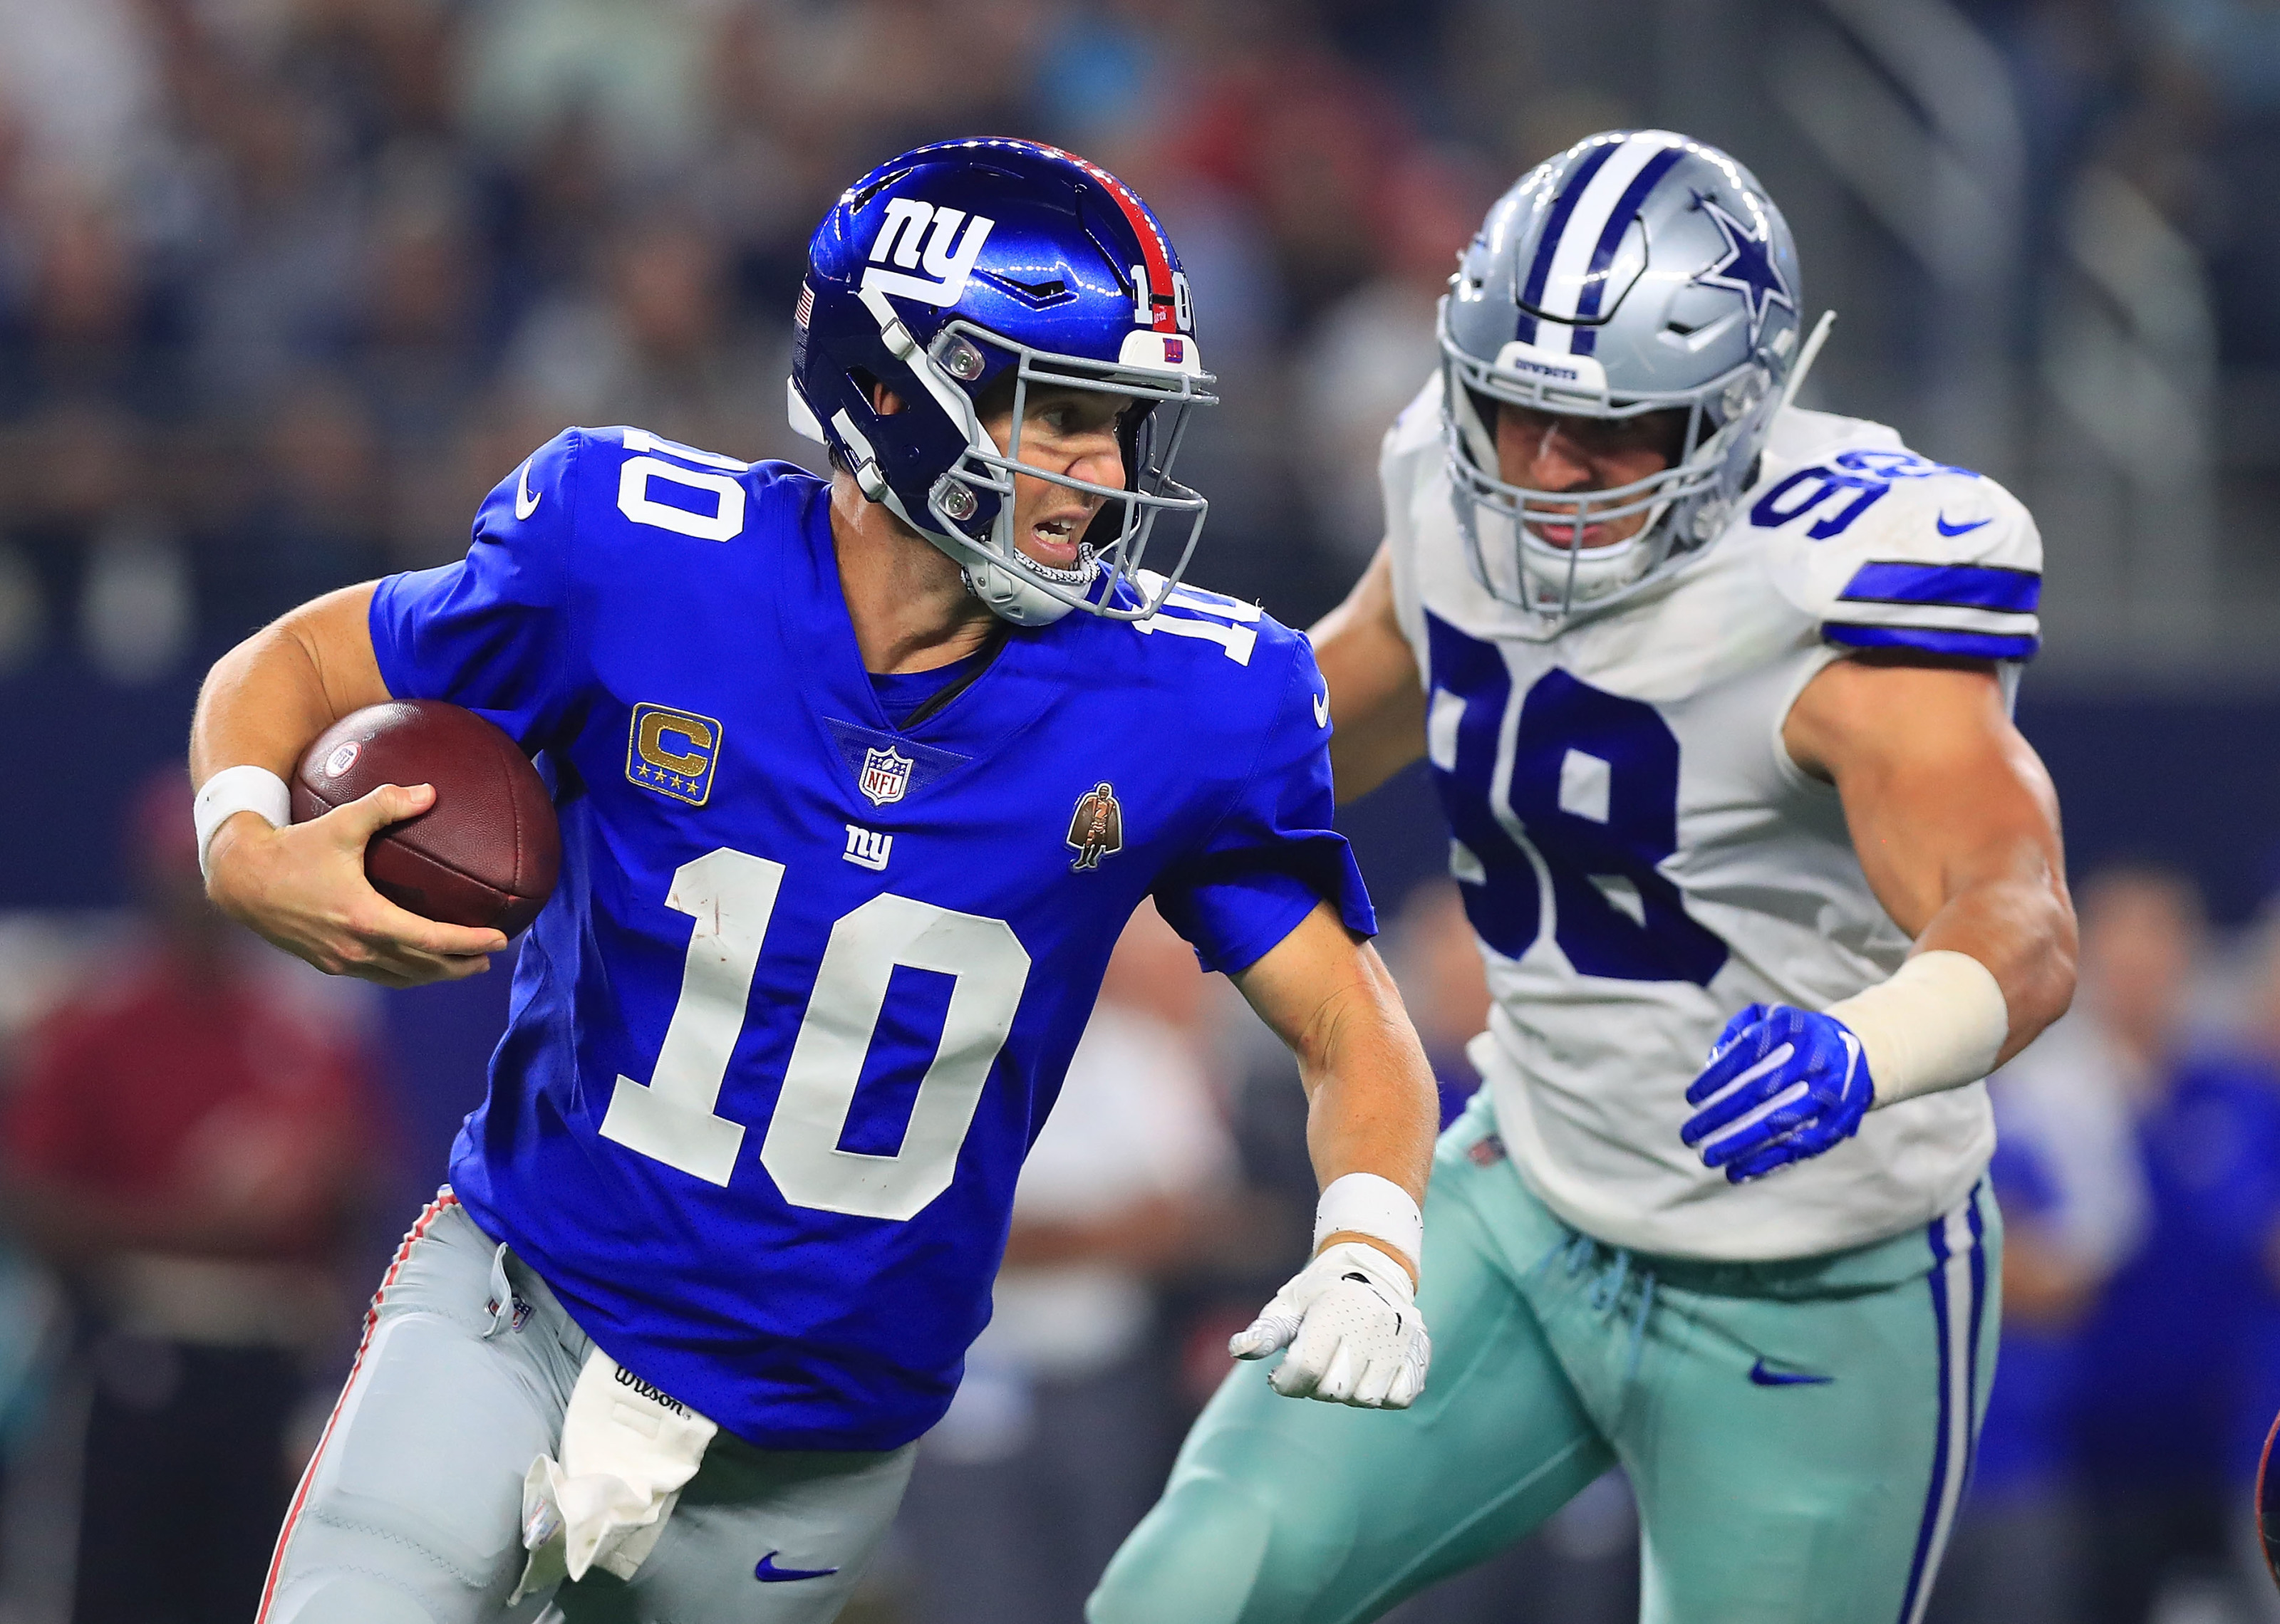 It is now time for the New York Giants to replace Eli Manning